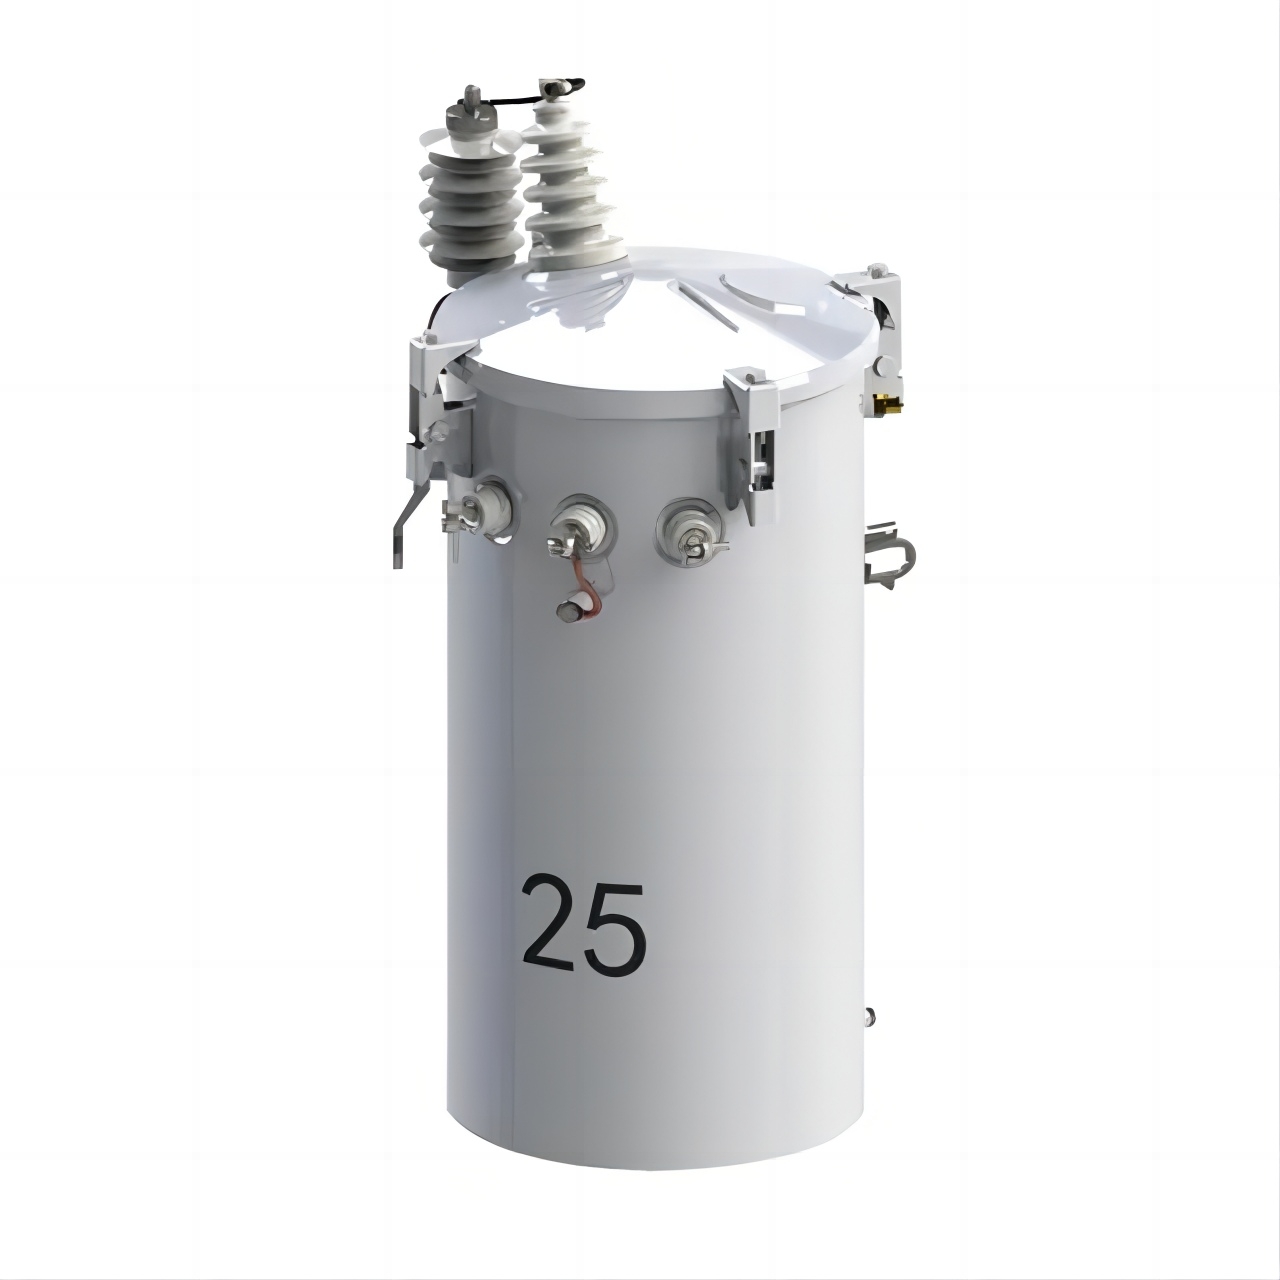 D9/11 6-11KV 5-160KVA single-phase distribution transformer: improving power supply efficiency and quality